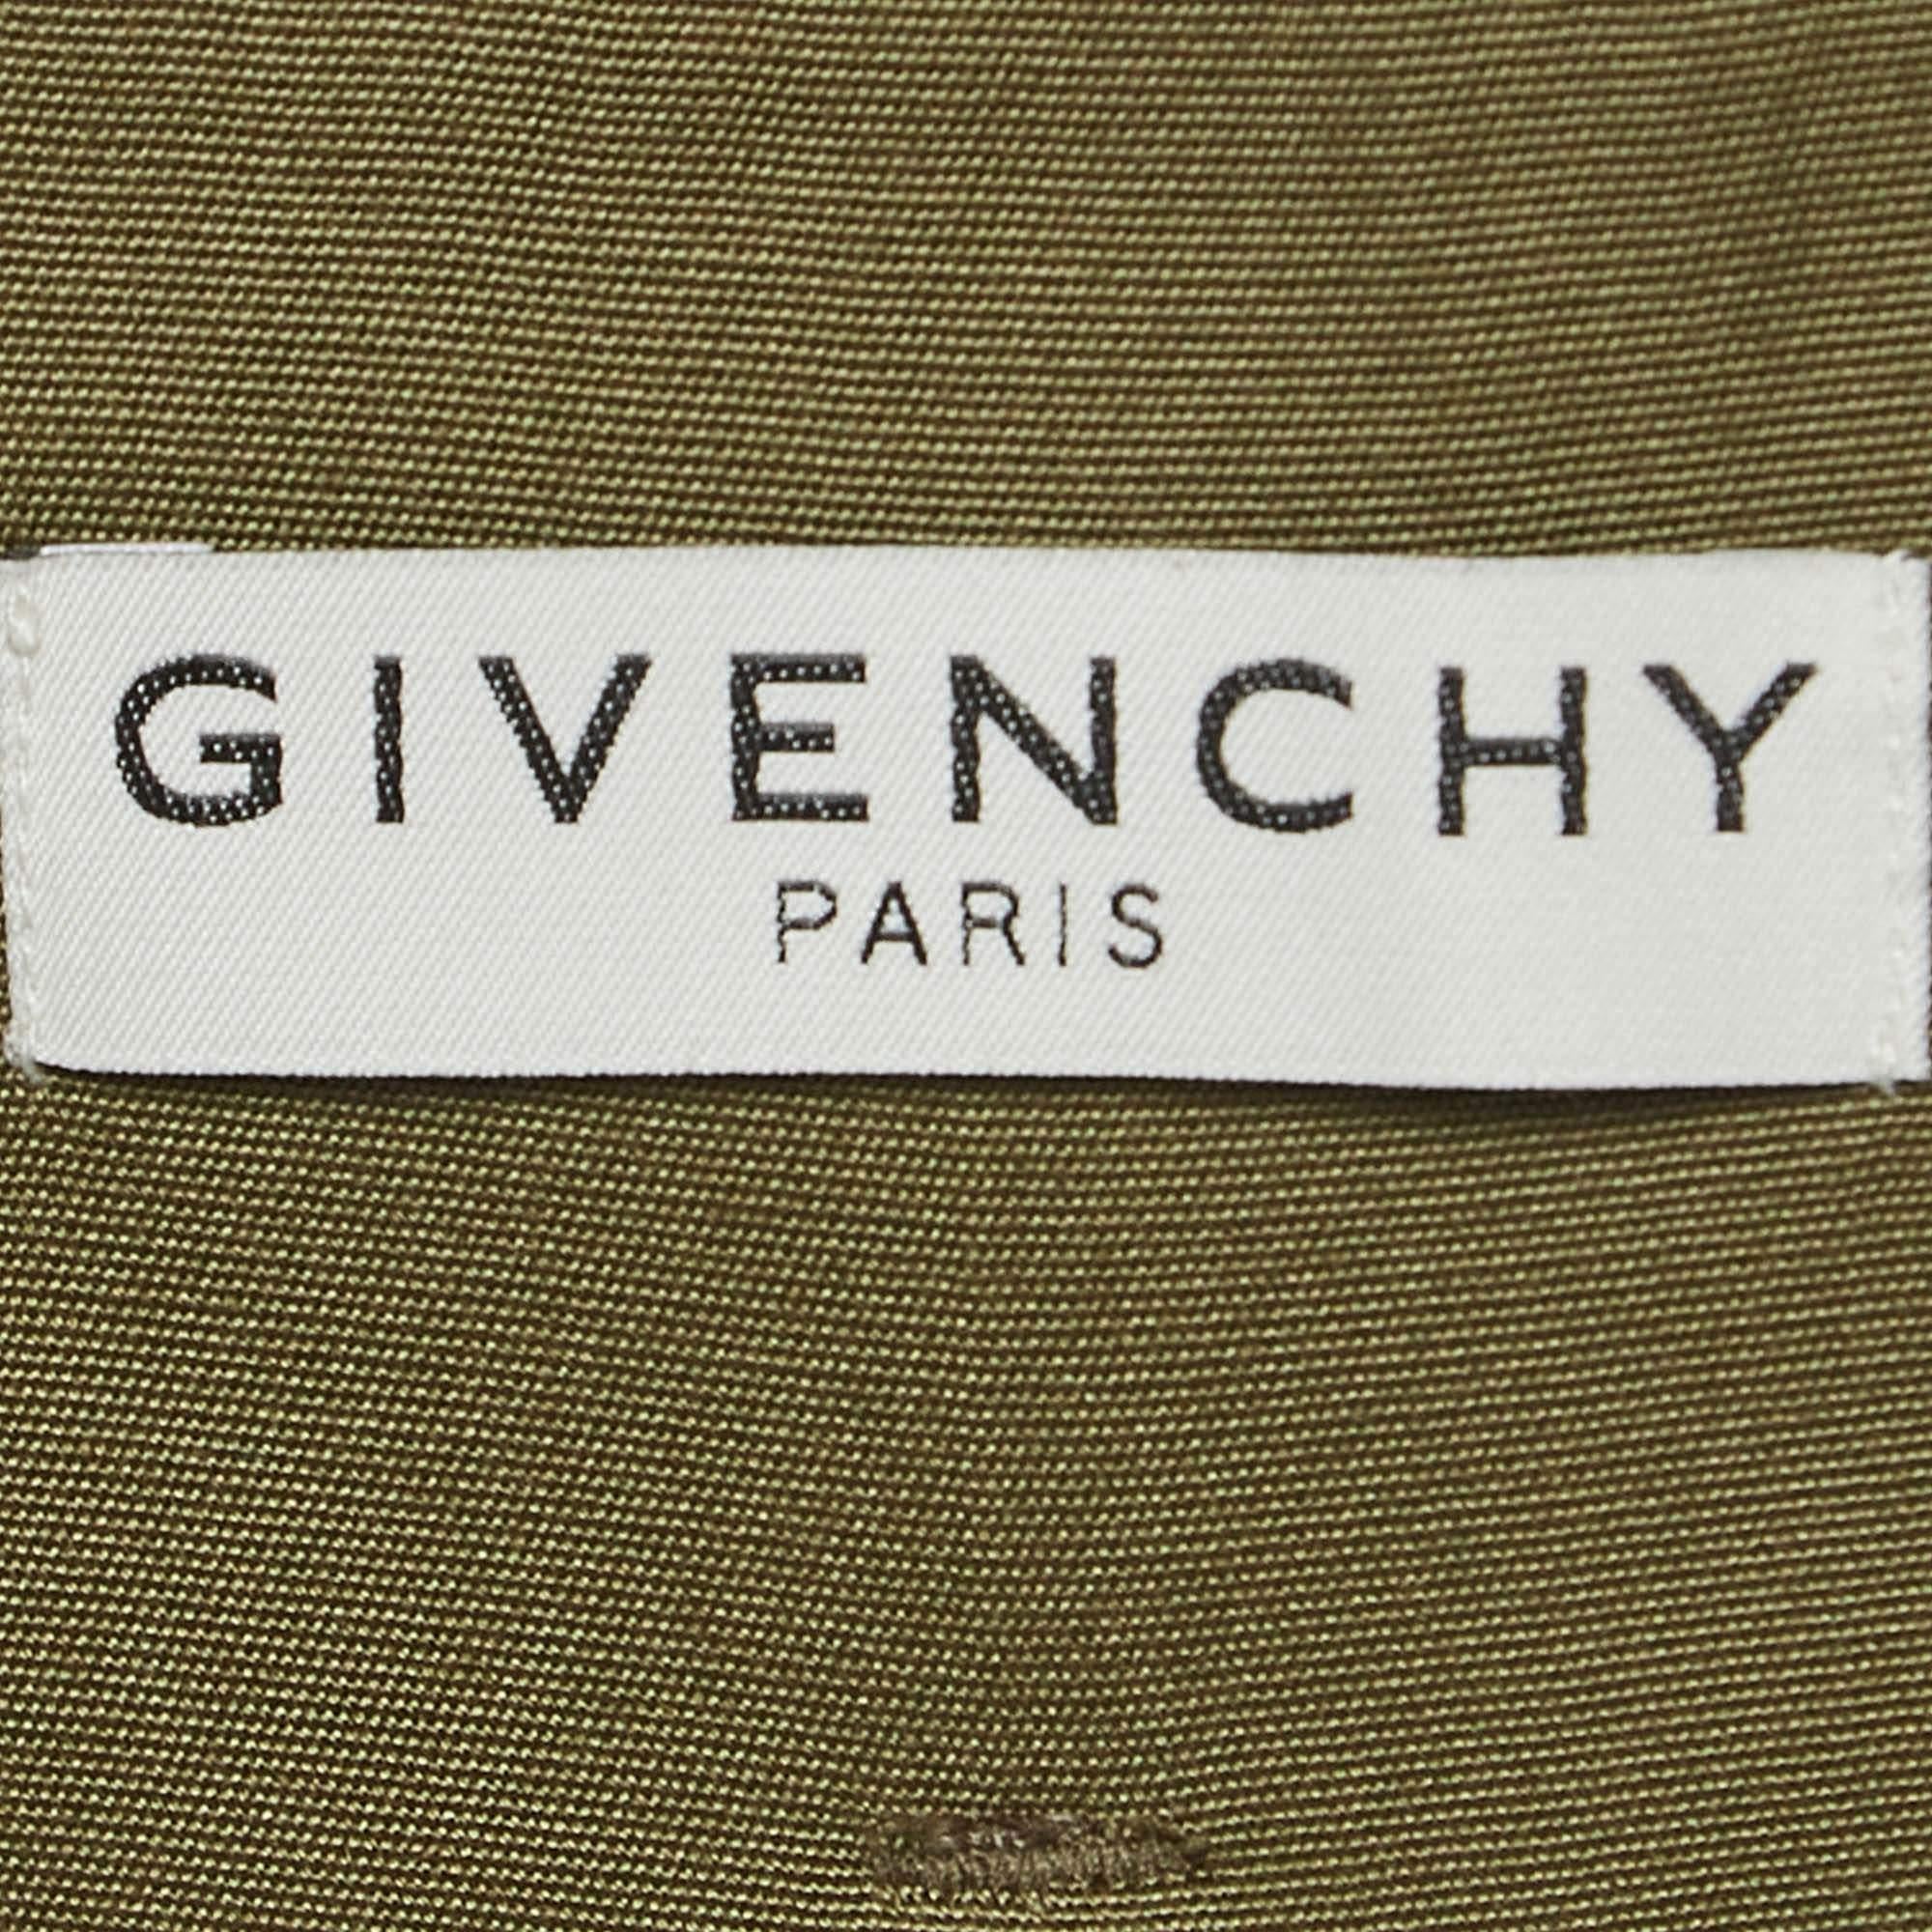 Step into sophistication with Givenchy trousers. Meticulously tailored from the finest materials, these trousers exemplify impeccable craftsmanship, offering timeless style and the utmost comfort for your everyday elegance.

